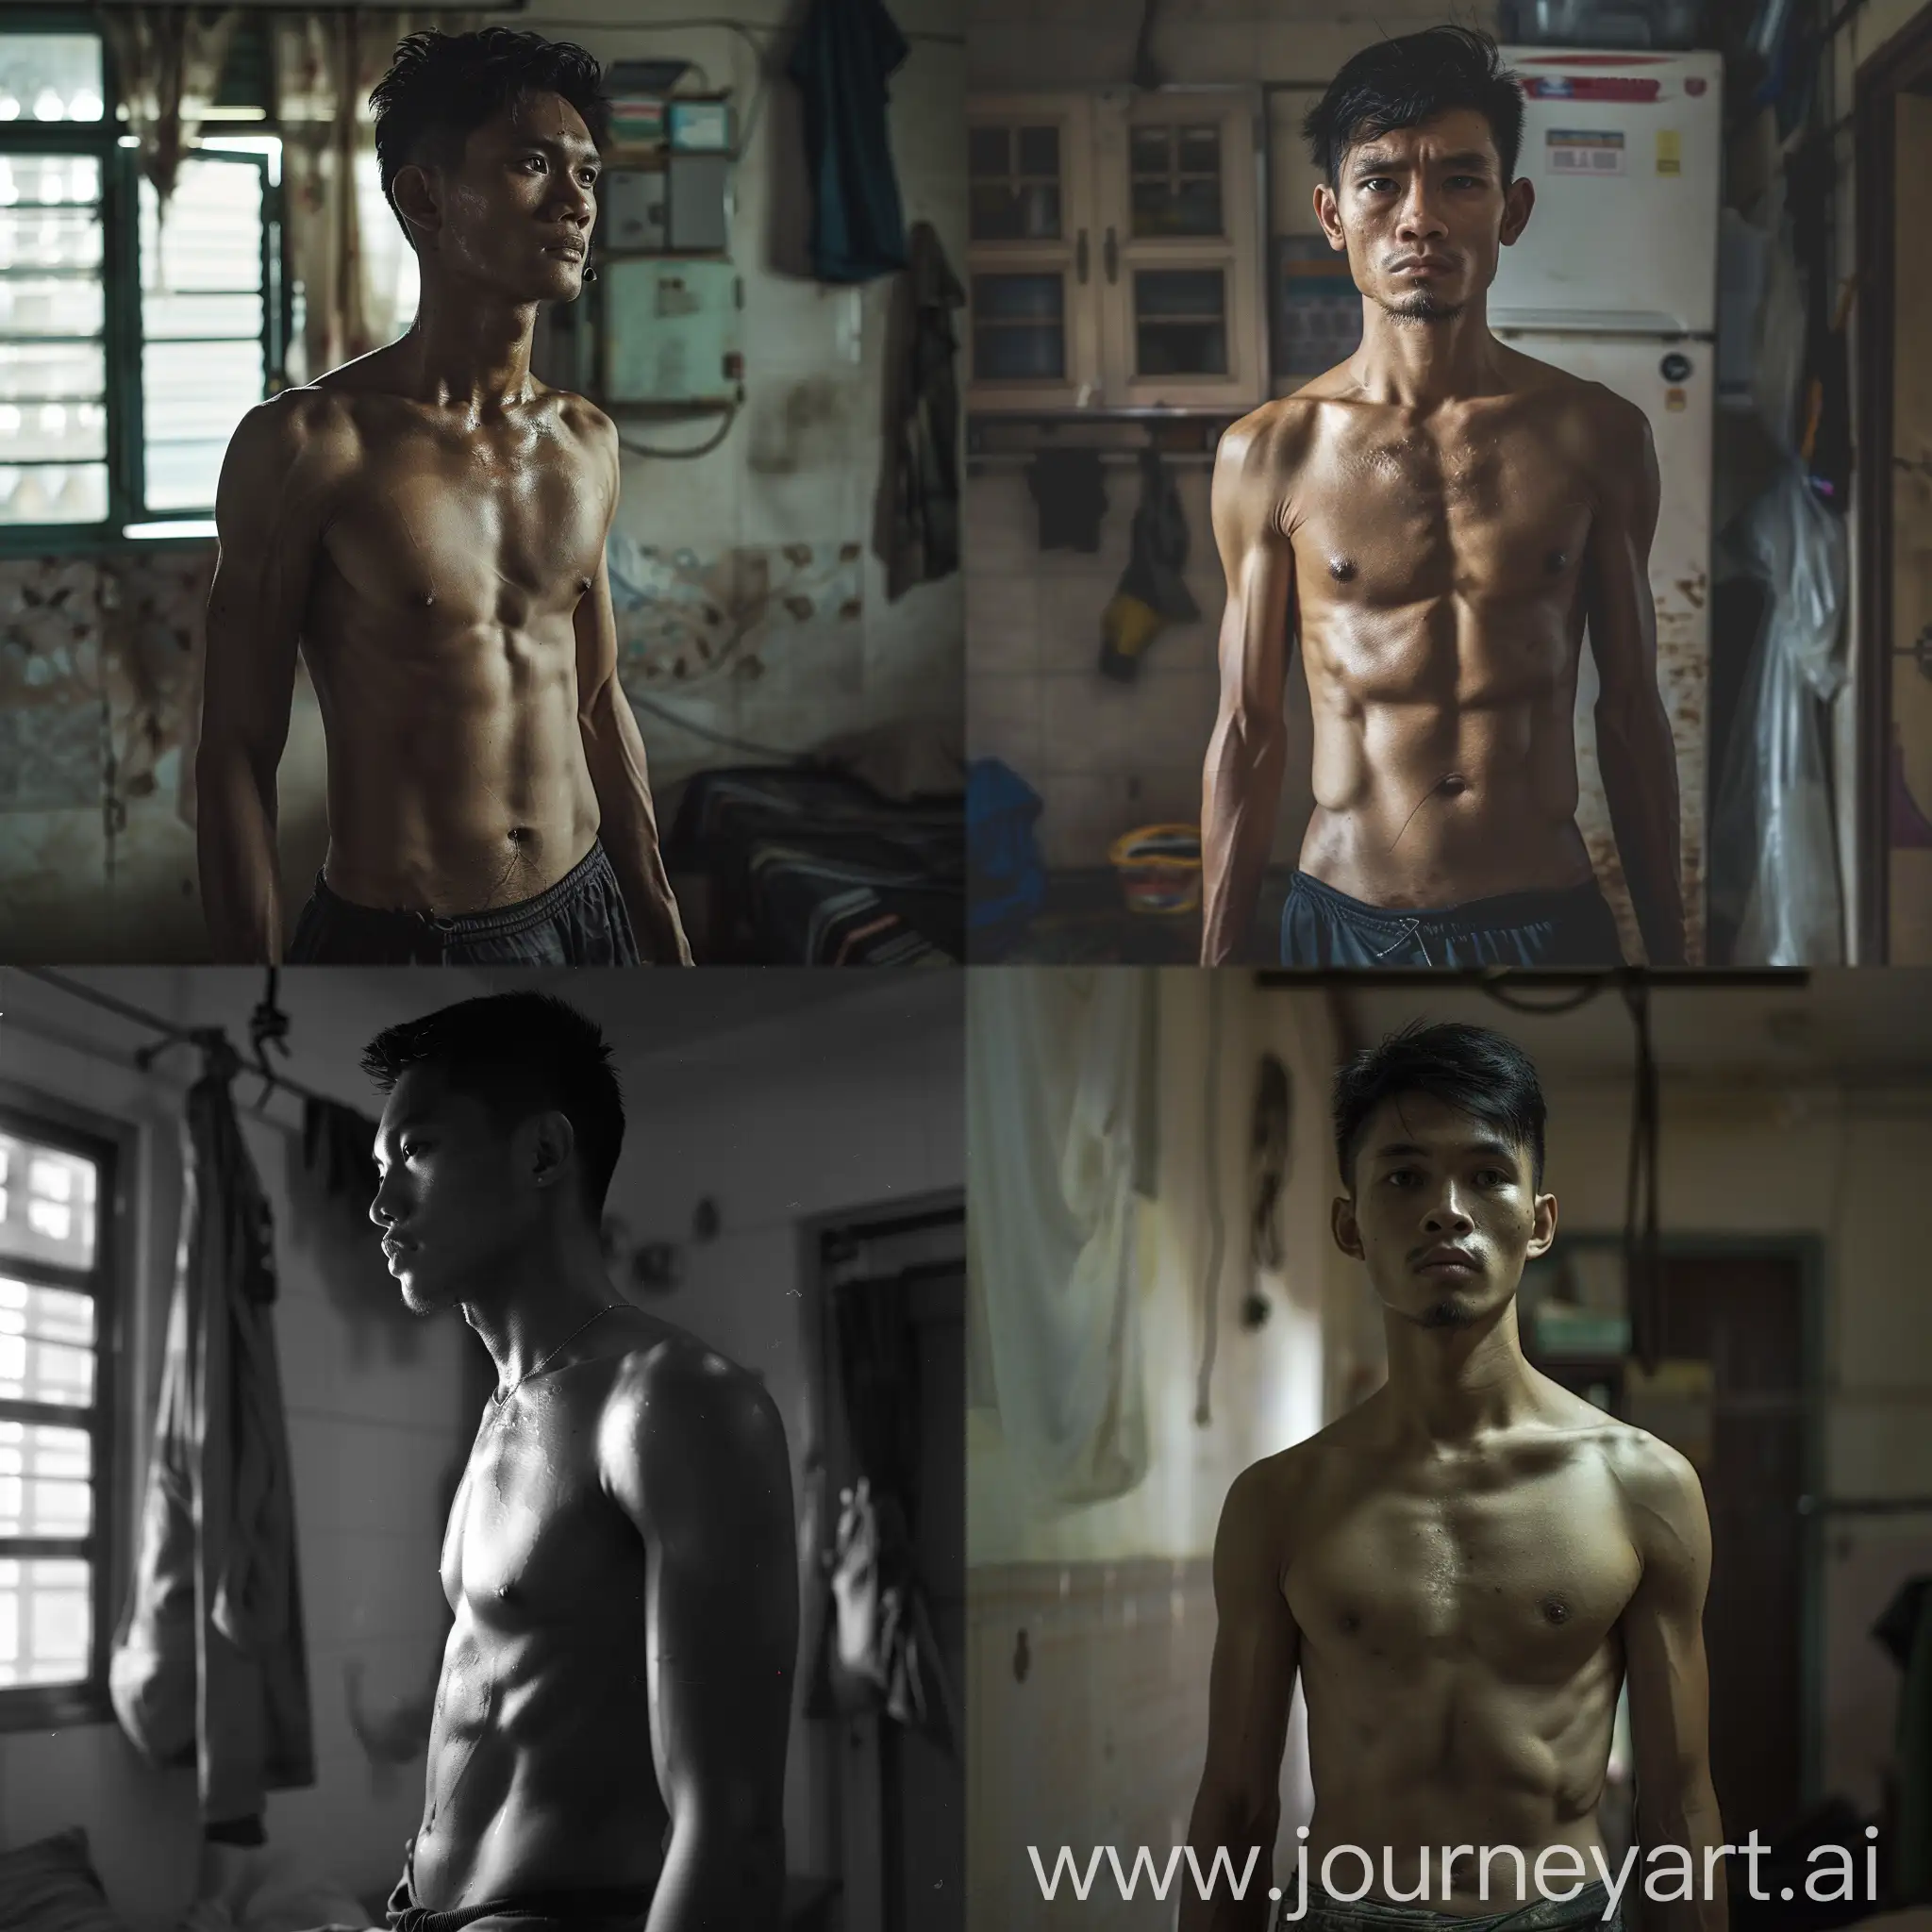 A skinny and shirtless Malay man, in a room